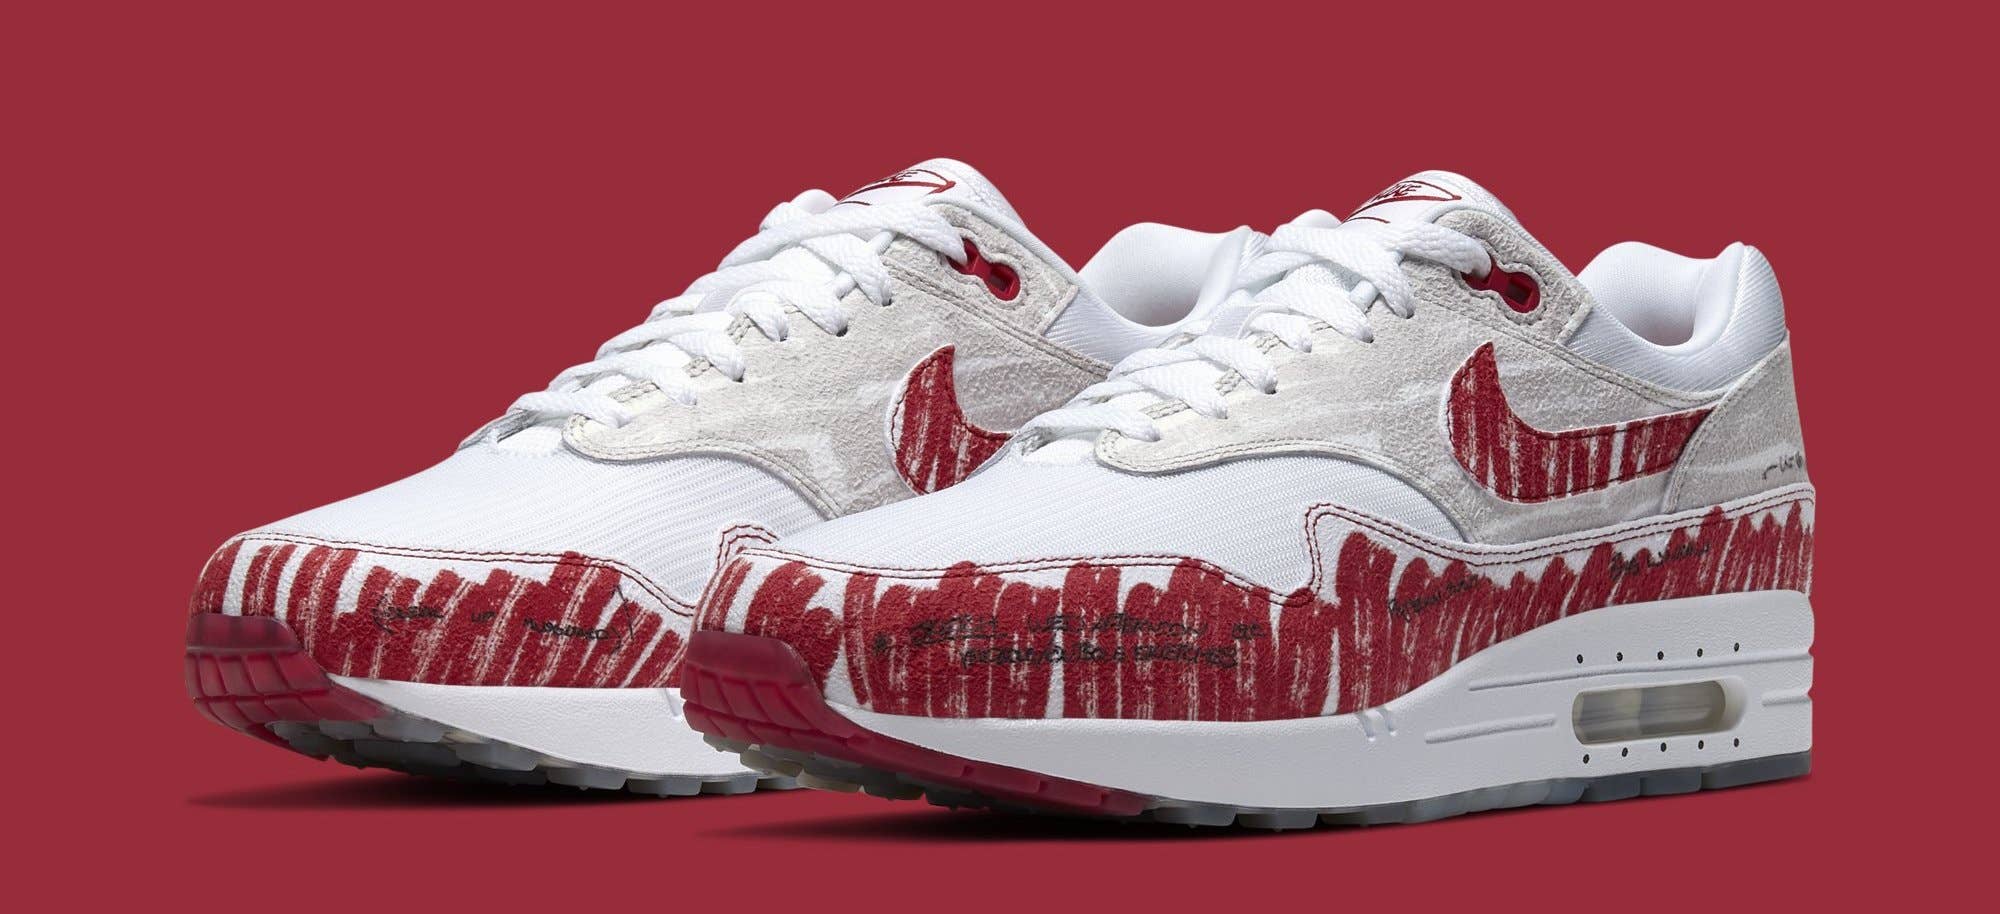 Best at the Air Max 1s Inspired by Tinker Hatfield's Sketch |